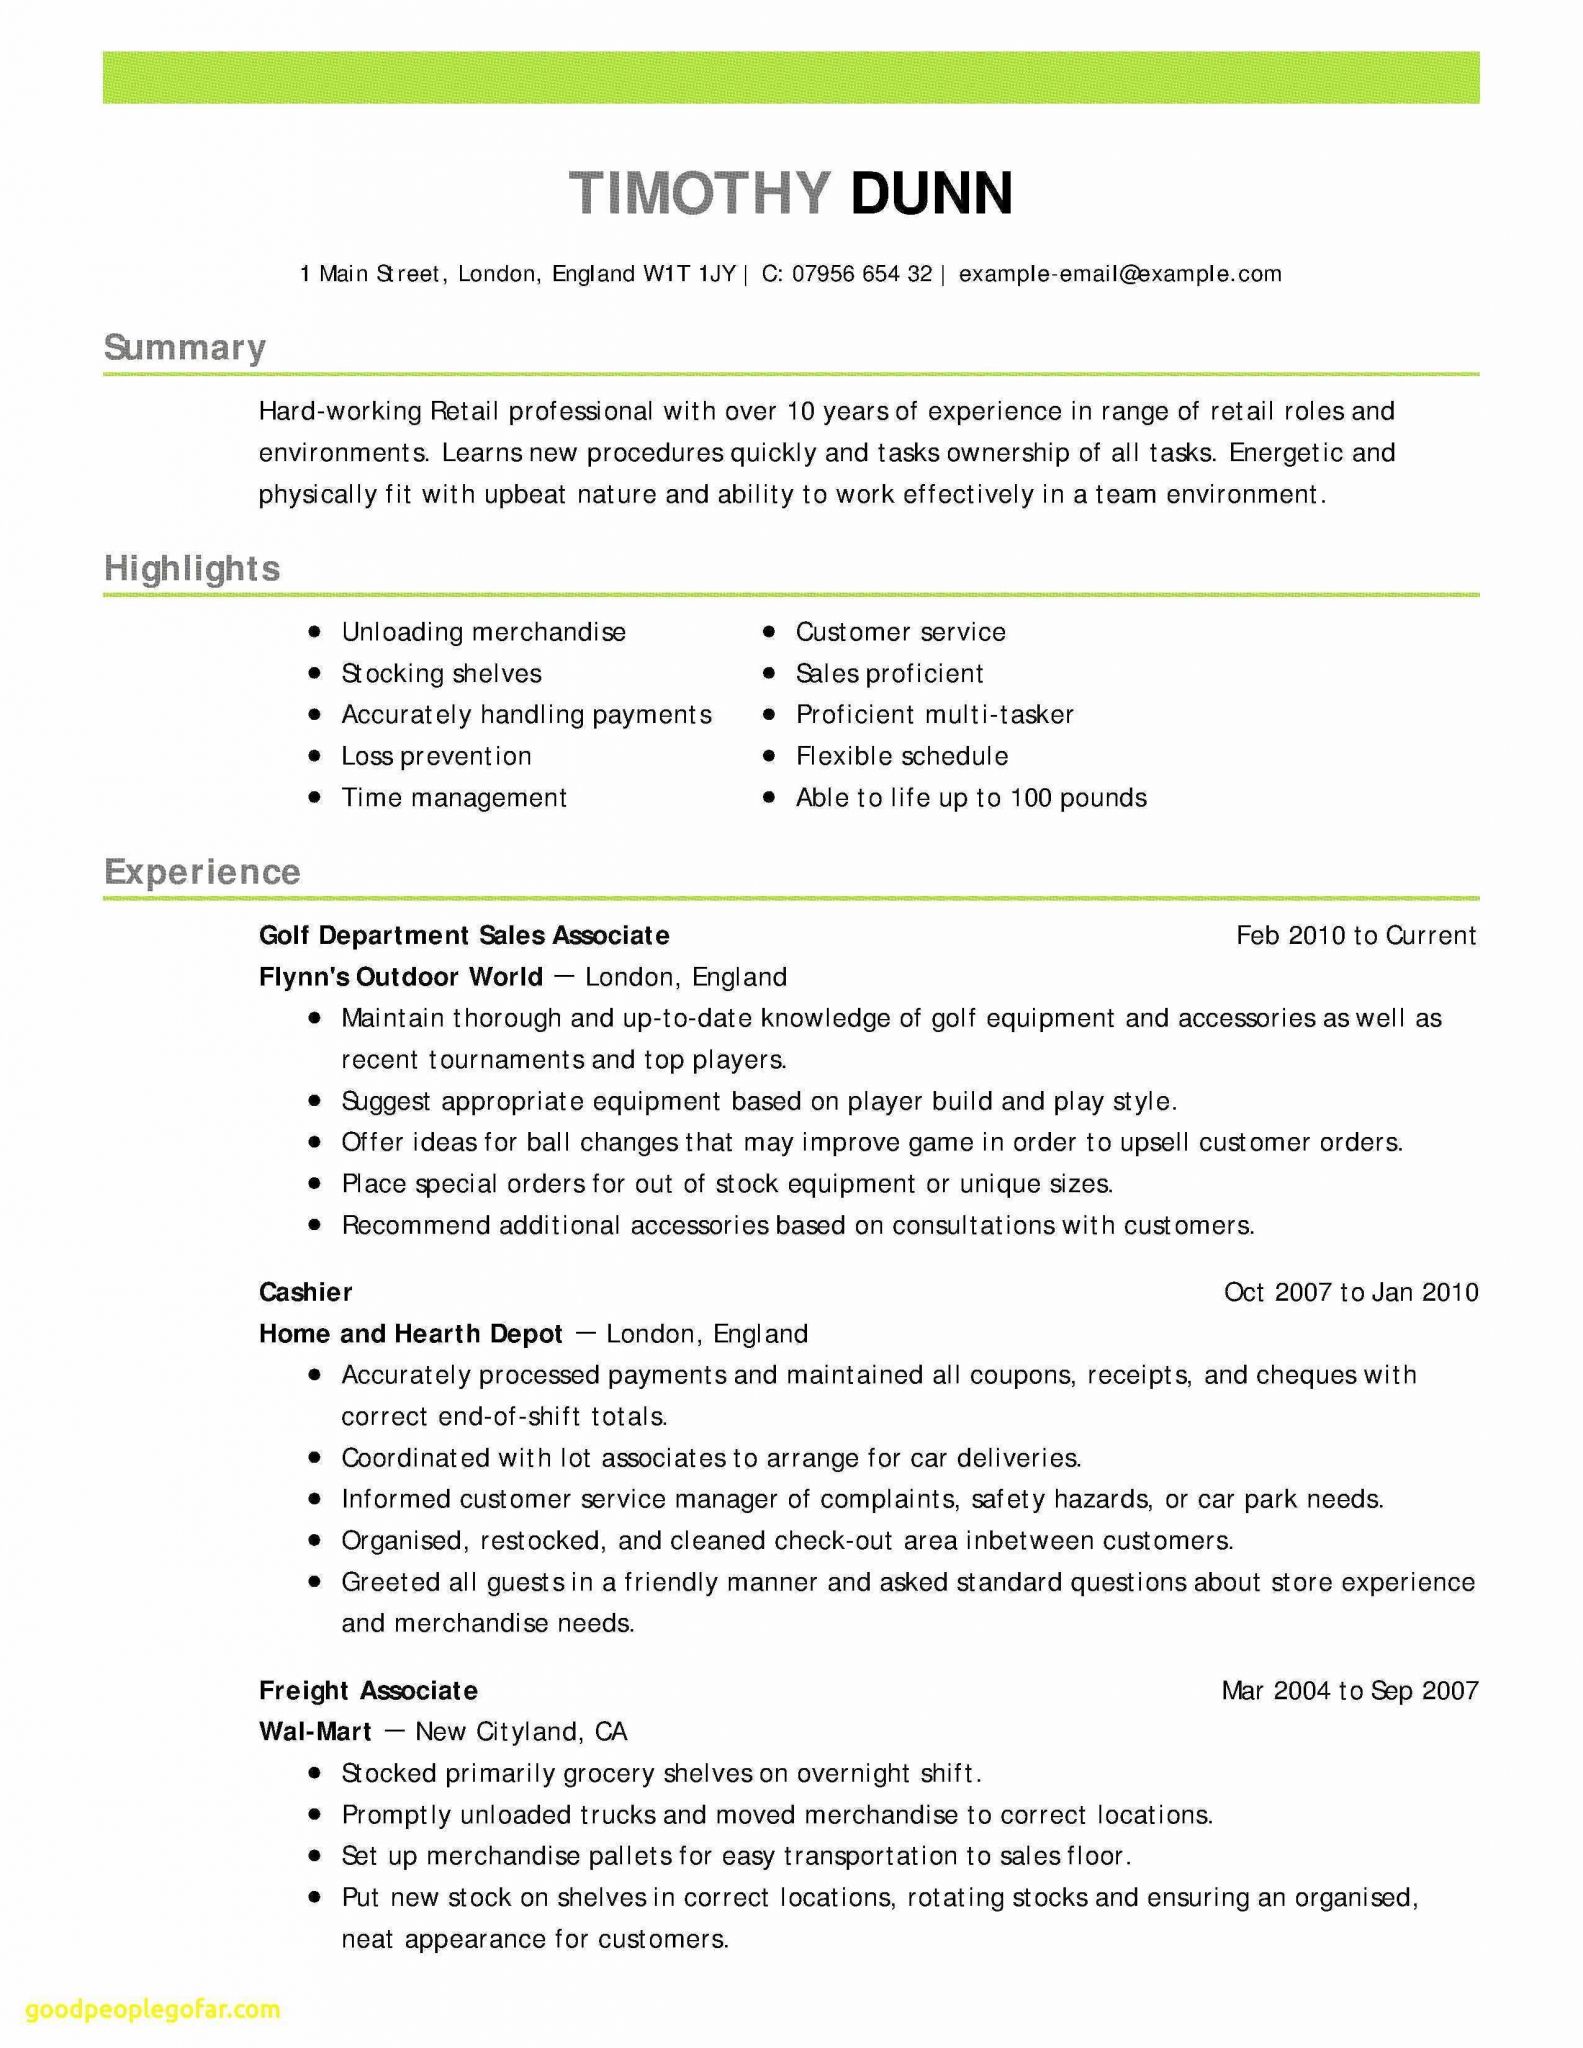 Grocery Shopping Life Skills Worksheet or Best Updated Resume formats Best Resume Puter Skills Examples